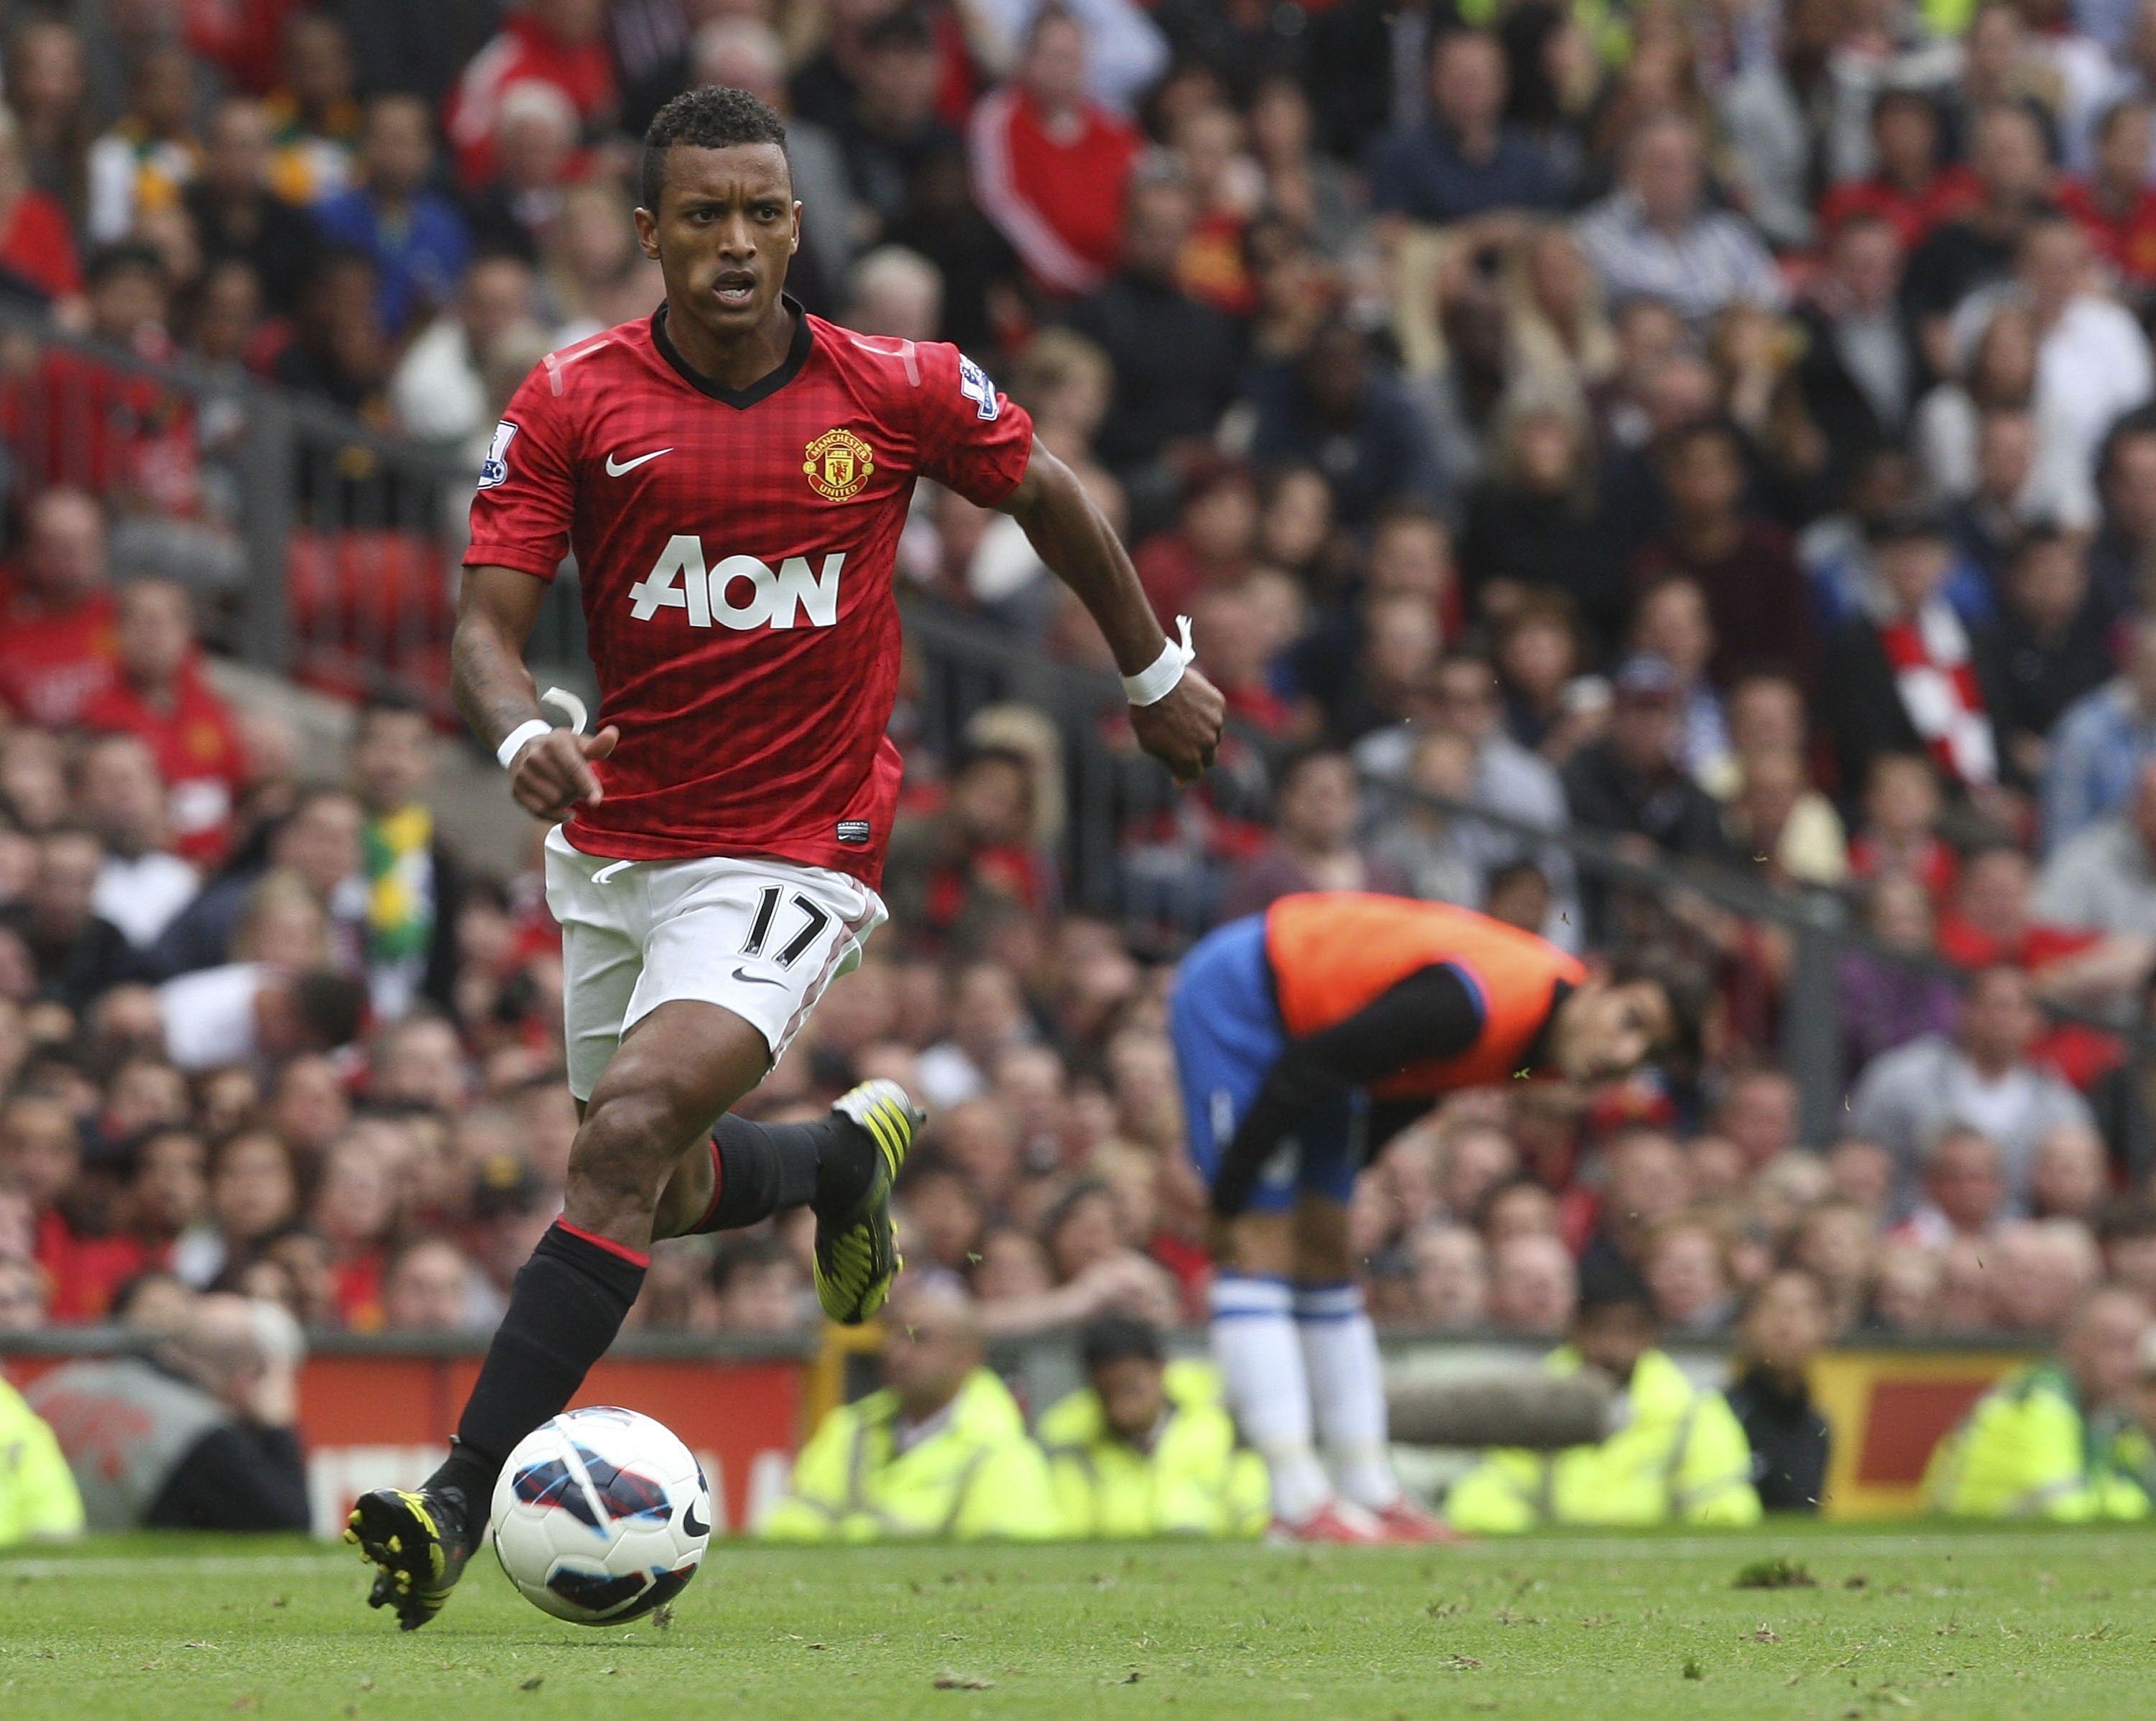 Manchester United Luis Nani in a middle of the game wallpaper